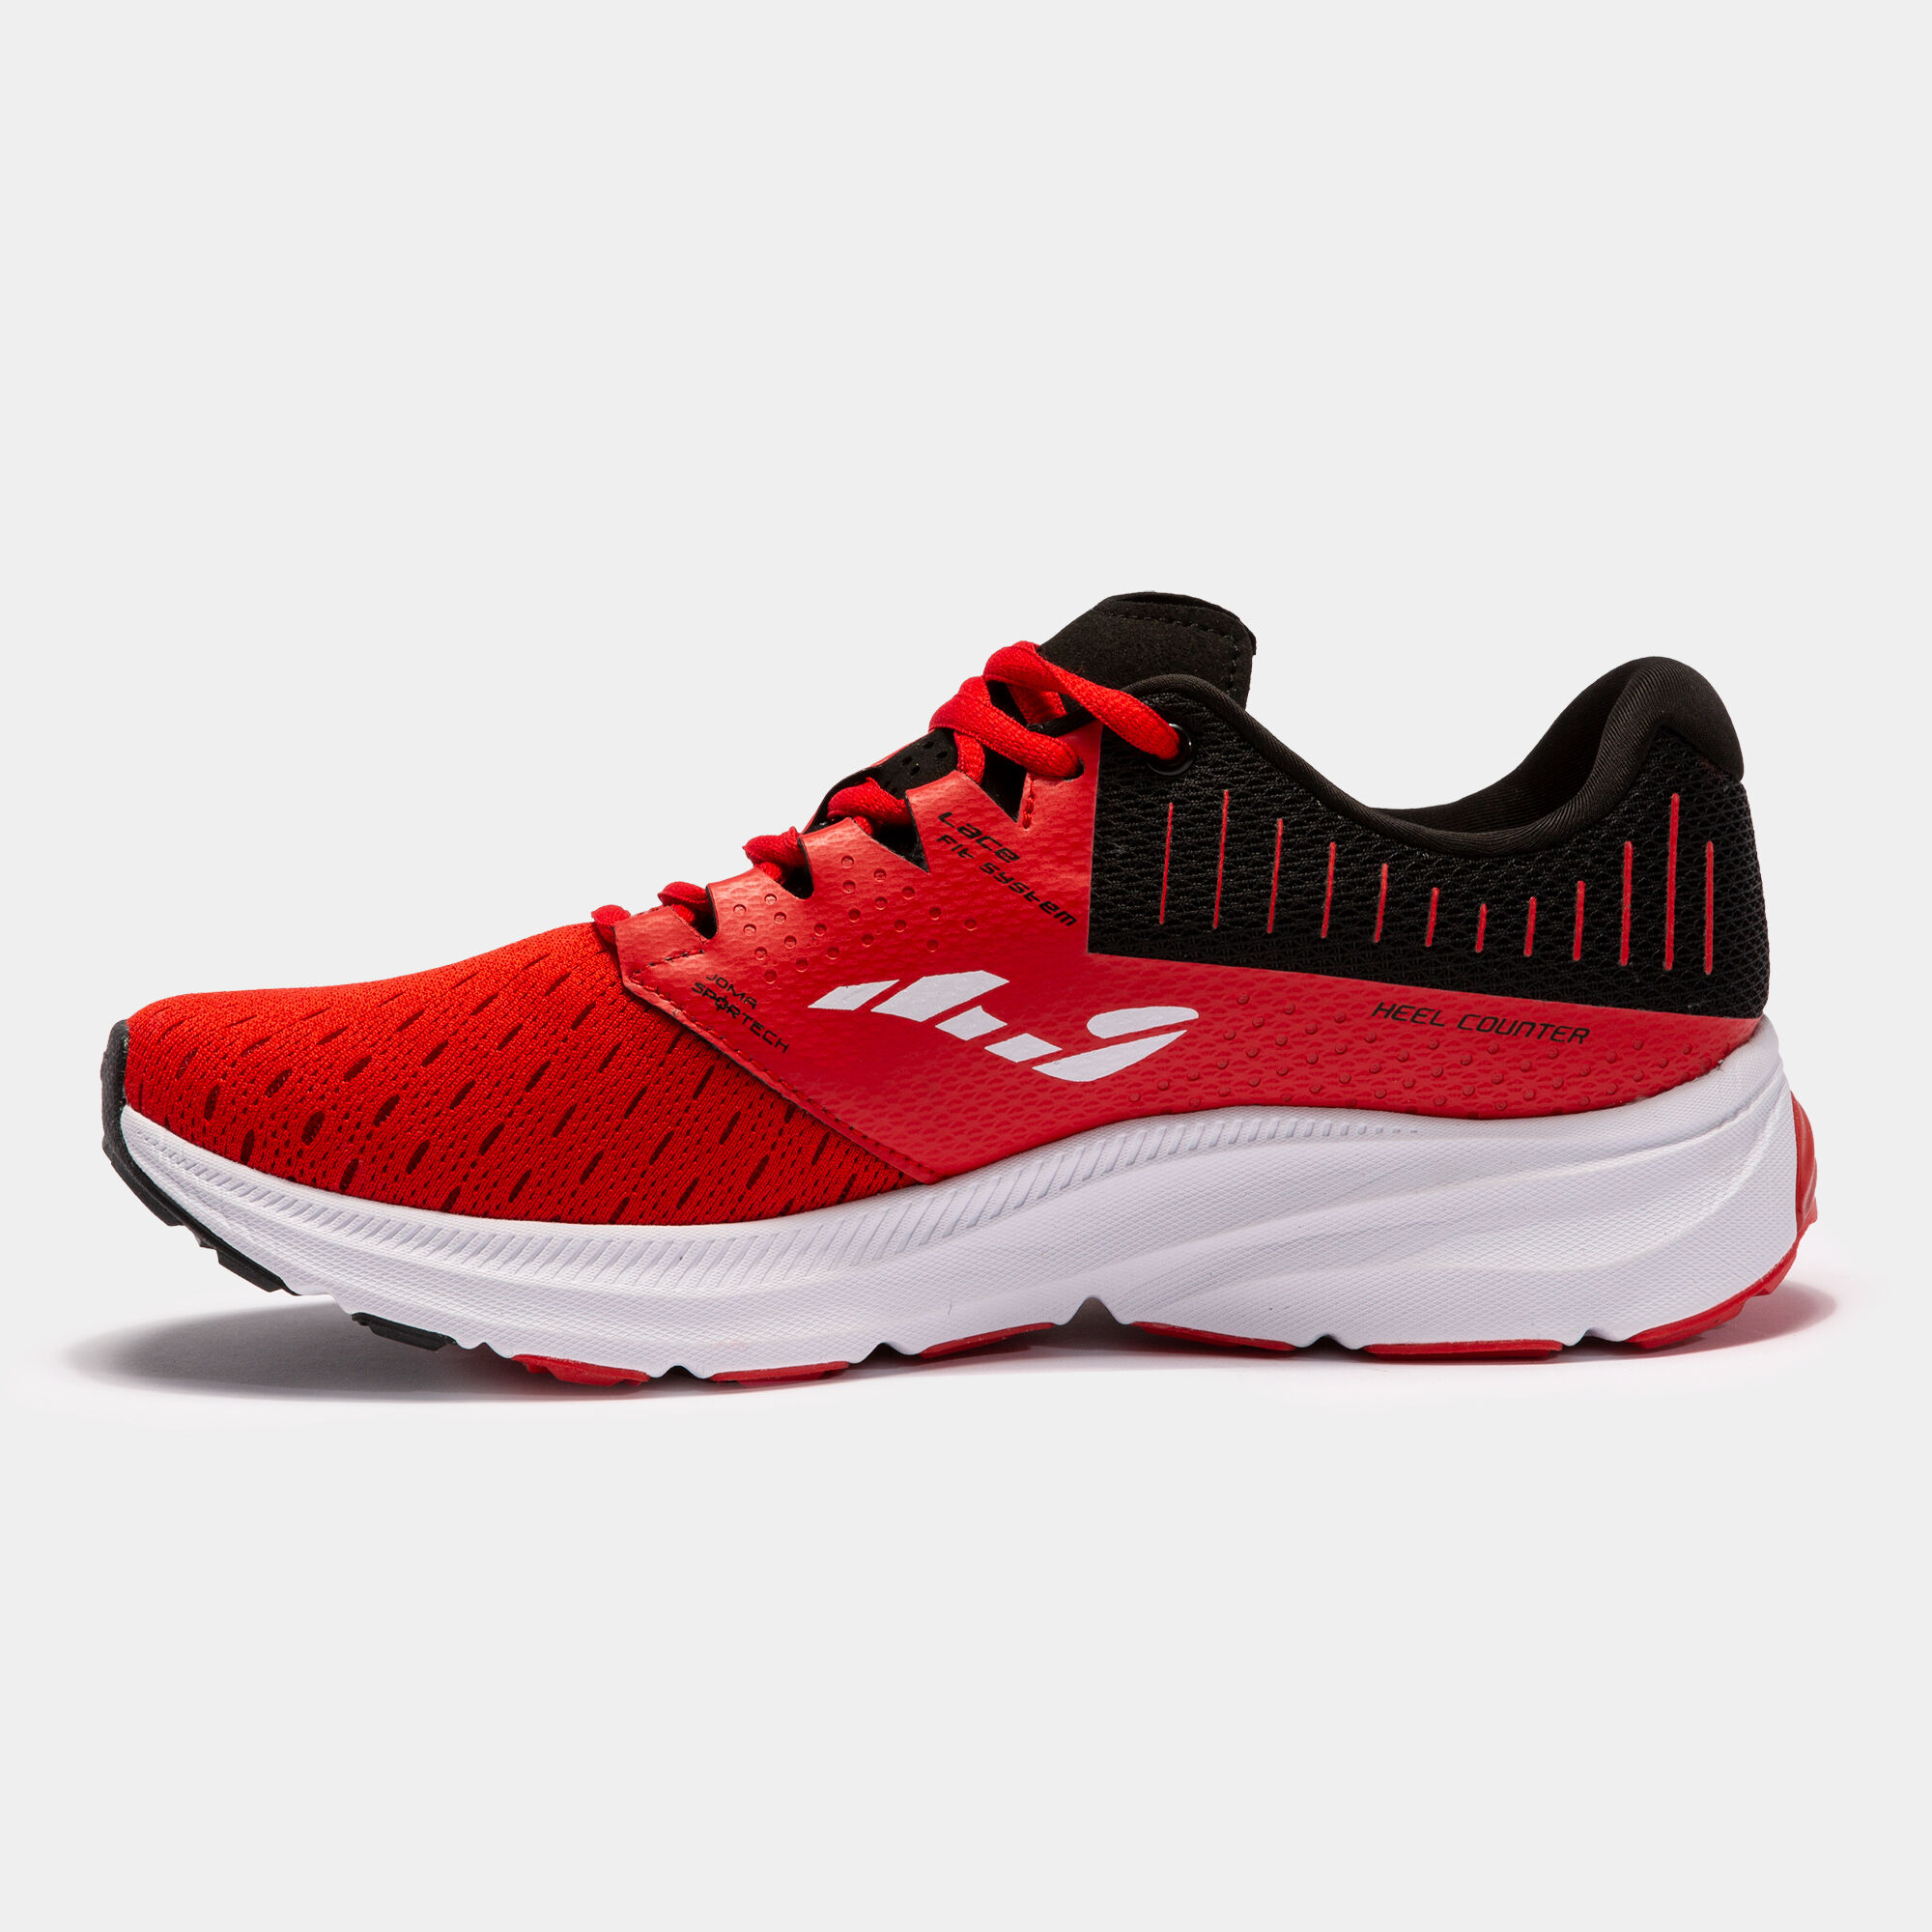 Bloquear He reconocido traducir Running shoes Victory 22 man red black | JOMA®